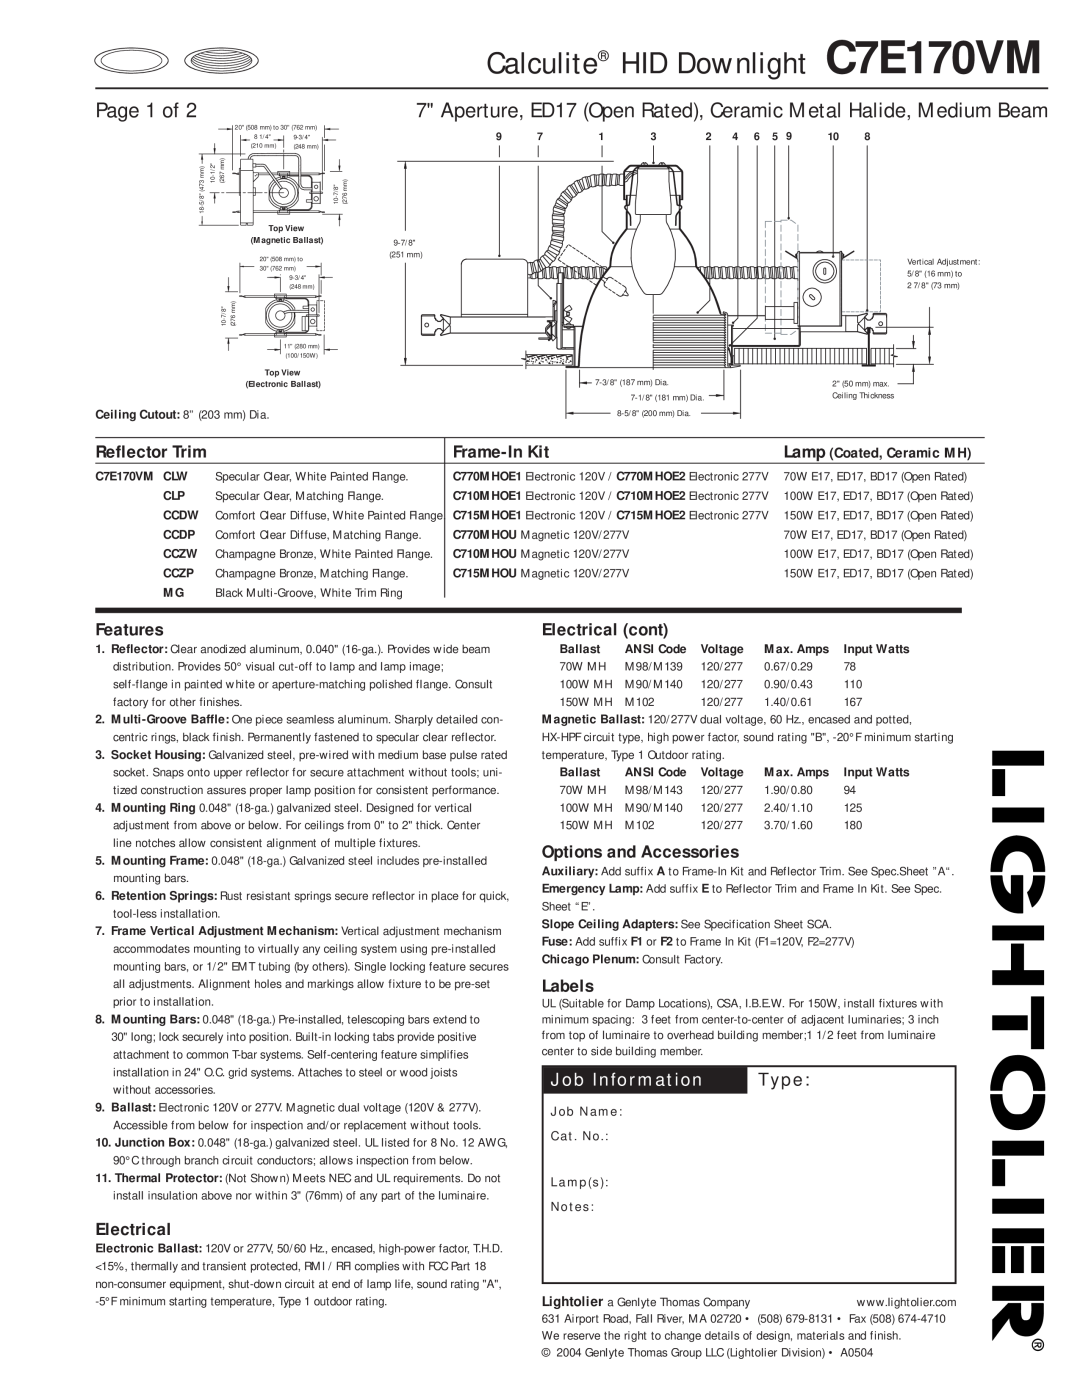 Lightolier C7E17OVM specifications Page 1 of, Reflector Trim, Job Information, Type, Calculite HID Downlight C7E170VM 